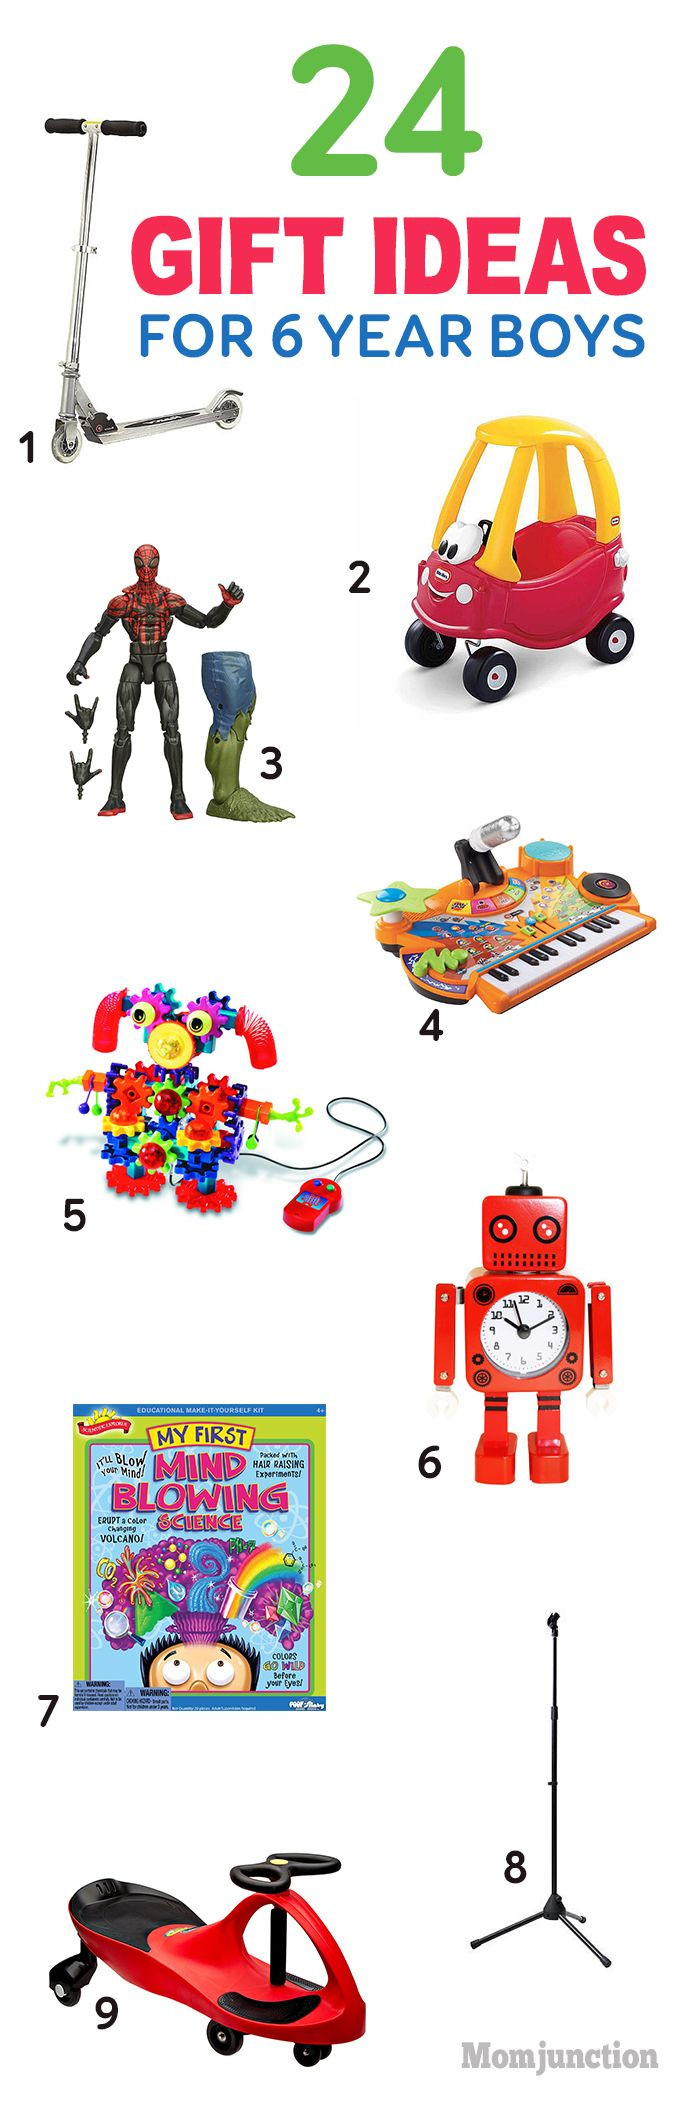 Gift Ideas For Boys Age 5
 35 Best Toys For 6 Year Old Boys To Buy In 2019